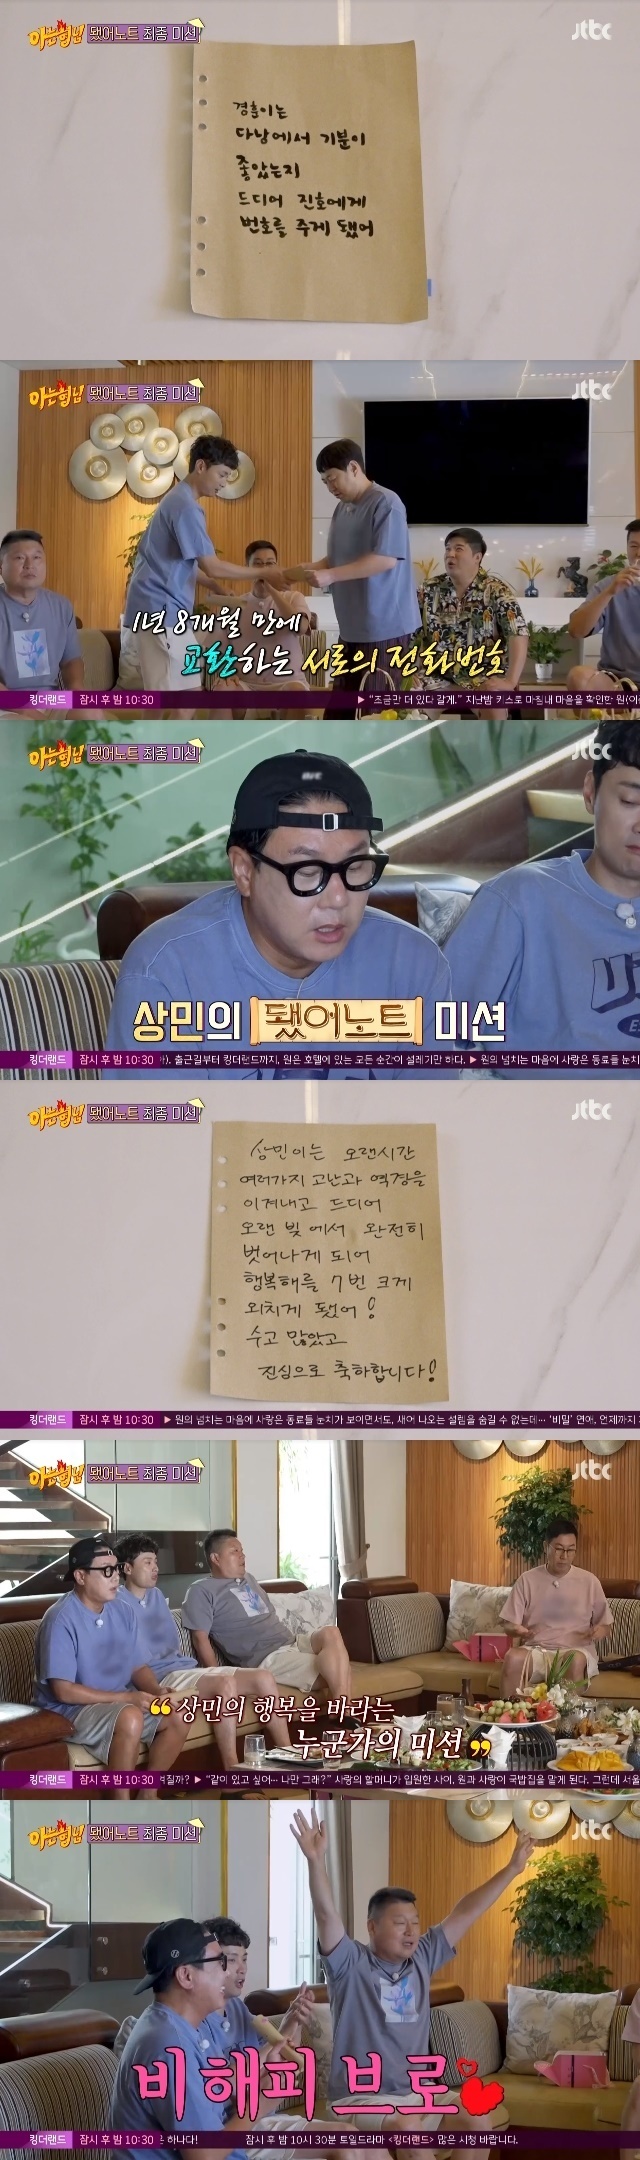 Sangmin, who has been a debtor for 18 years, celebrated the complete liquidation of the 6.9 billion debt.The 392nd JTBC entertainment show Knowing Bros (hereinafter referred to as Knowing Bros), which aired on July 15, was followed by the brothers first overseas trip, Vietnam Da Nang.Prince Hodong of Goguryeo, Seo Jang-hoon, Min Kyung Hoon and Lee Jin-ho, who won a lot of pocket money through the game, will tour Da Nang city with Shin Dong.Those who have a total allowance of 1.12 million won have lunch at famous restaurants among Koreans, bought coconut coffee, stopped by the market and enjoyed shopping.At this time, the Prince Hodong of Goguryeo and other brothers attracted attention not only to Koreans but also to locals who could meet in various places in Vietnam.On the other hand, the relatively poor Lee Soo-geun, Sangmin, Kim Young-chul and Kim Hee-chul were on the SporTV tee tour.The city tour team was worried that those who did not have a lot of pocket money would be able to enjoy the SporTV tea abundantly, but they had a better time than they thought.As well as riding a banana boat, Kim Hee-chul and Kim Young-chul enjoyed parasailing.Lee Jin-ho said, Its been a year and a half since I came in.Lee Soo-geun said, I did not think I was going to shoot because I was traveling with my brothers.Prince Hodong of Goguryeo jumped up and asked his brothers, Can I do a toast?According to Lee Soo-geun, Prince Hodong of Goguryeo, who does not do things like a toast, Its obvious.There are stars in the sky, beautiful flowers on the ground, and you are in my heart. Prince Hodong of Goguryeo repeatedly said, I felt it was a real exhaustion. My brothers greeted Prince Hodong of Goguryeo and said, Thank you.Prince Hodong of Goguryeo belatedly noticed that Sangmin was away.In fact, Sangmin was cooking for his brothers using locally sourced meat and spices imported directly from Korea.This Sangmin treats his brothers with their own recipes and treats them with pork chops, and treats them with bibim noodles as a midnight snack.The next day, on the last day of the trip, my brothers wrote their own notes anonymously.I was so excited that I was in love with Janghoon Lee and the couple Lambada, Hee Chul Lee approached Yong Chul Lee instead of me who was ashamed and gave me a kiss saying thank you, Kyung Hoon was in a good mood at Da Nang I finally gave it to Jinho.Thanks to this, Min Kyung Hoon and Lee Jin-ho exchanged numbers in a year and eight months.In addition, Sangmin has overcome various hardships and adversity for a long time, and finally it is completely out of debt for a long time, and I shouted happily seven times! Thank you very much and congratulations sincerely.Sangmin received a lot of congratulations from his brothers after he did this.